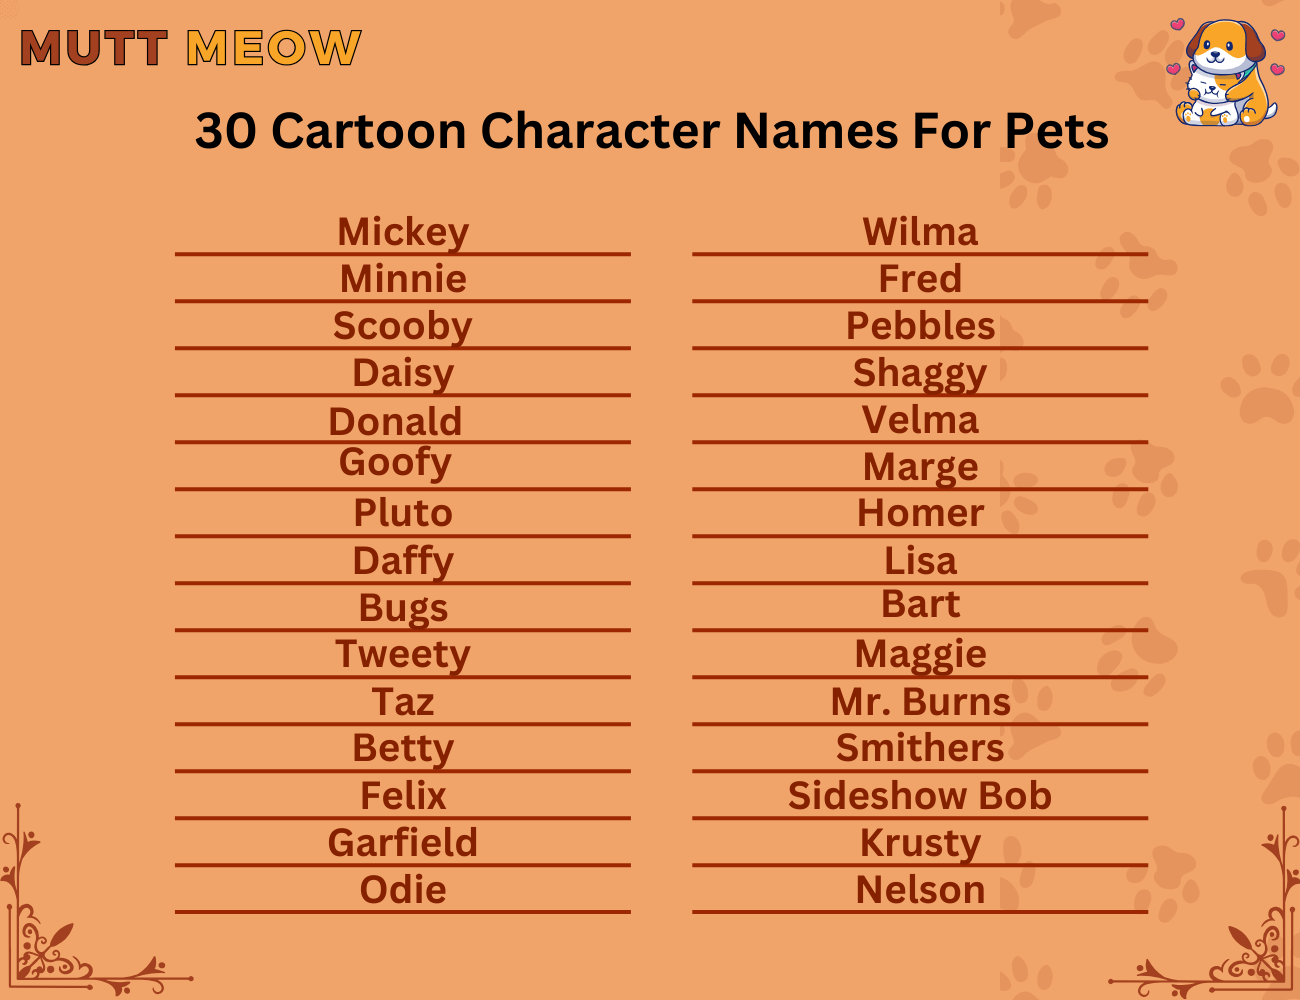 30 Cartoon Character Names For Pets (1)